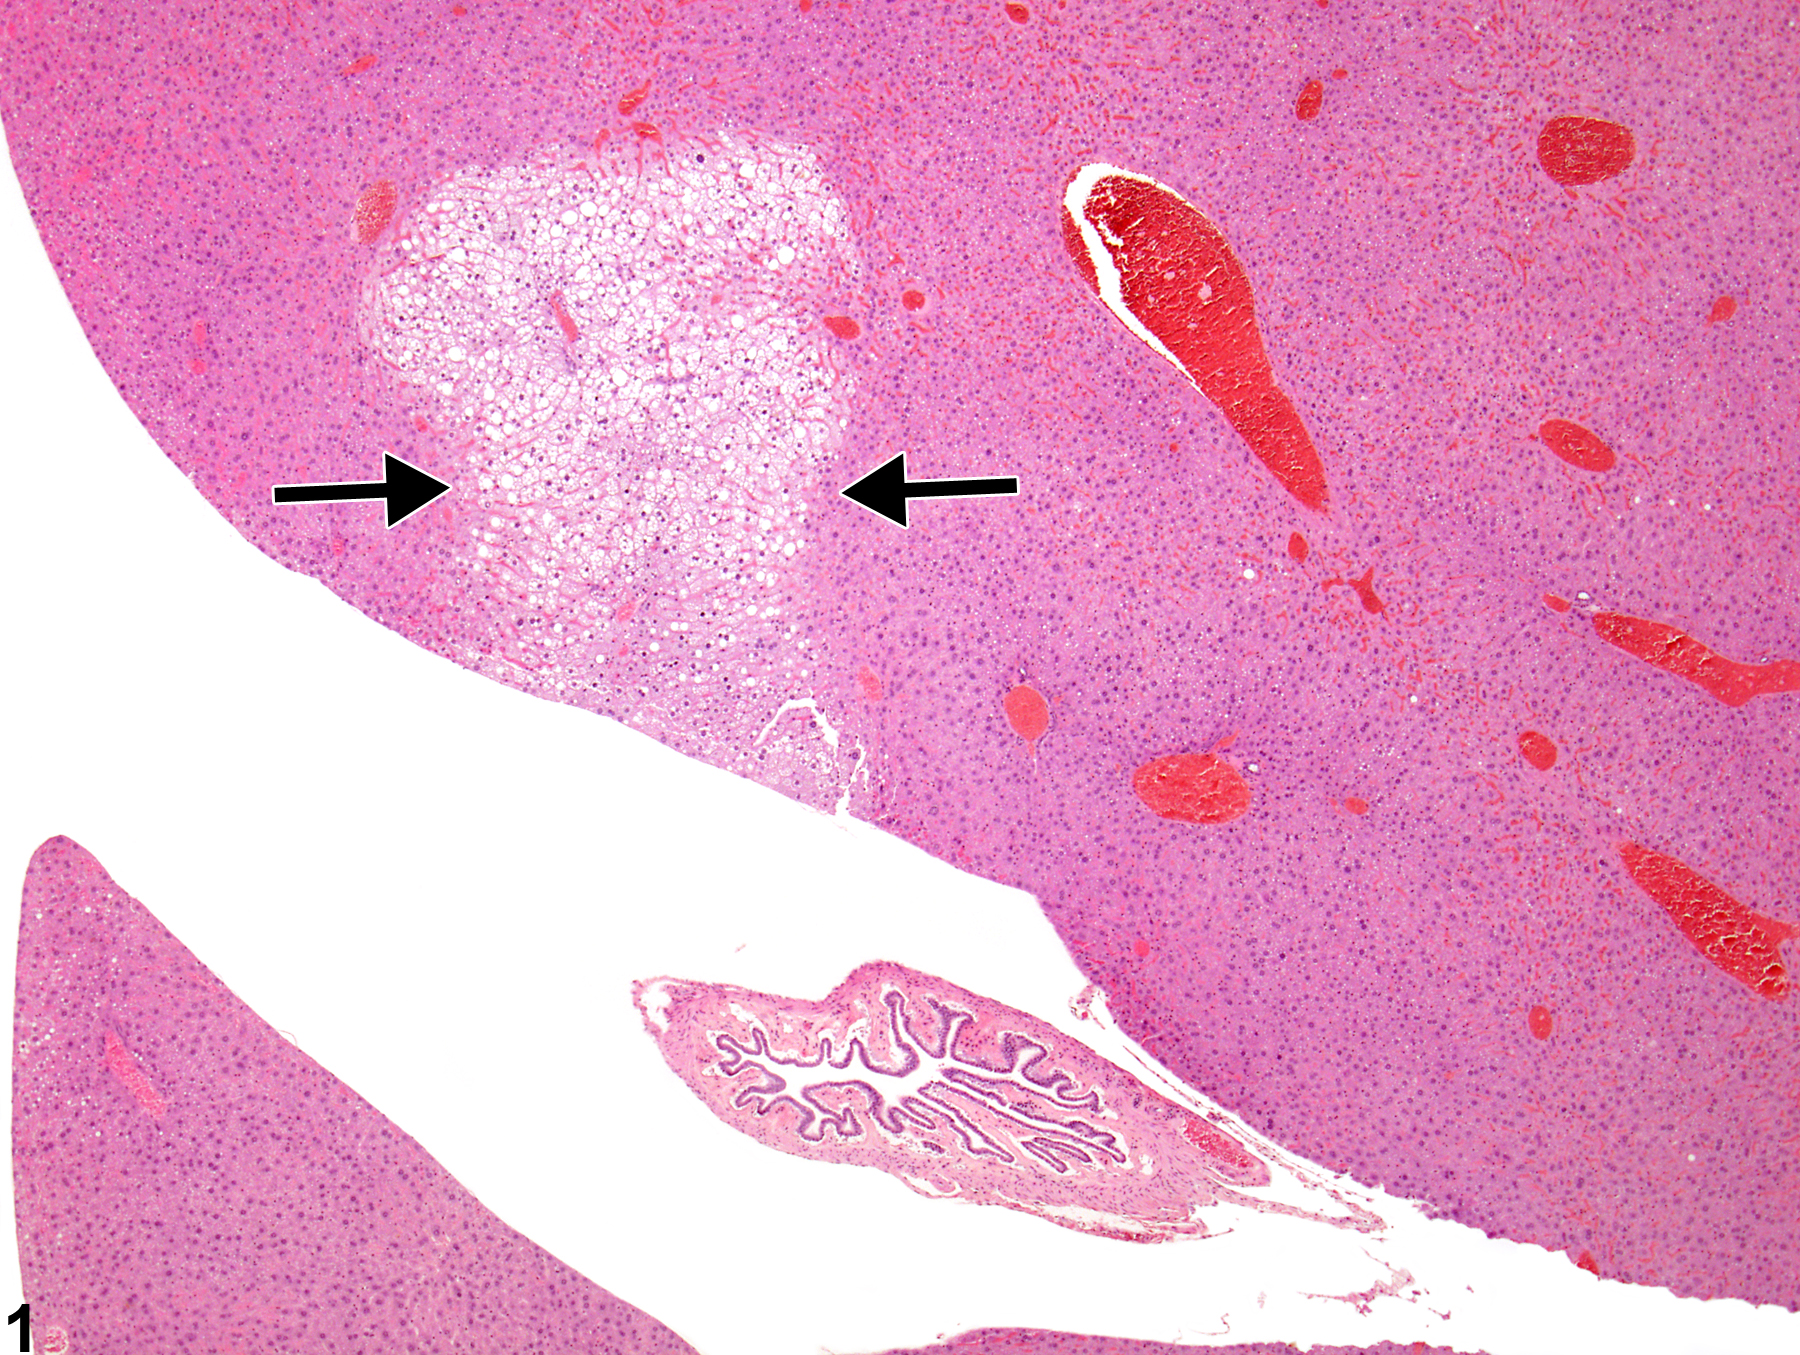 Image of tension lipidosis in the liver from a male B6C3F1 mouse in a chronic study